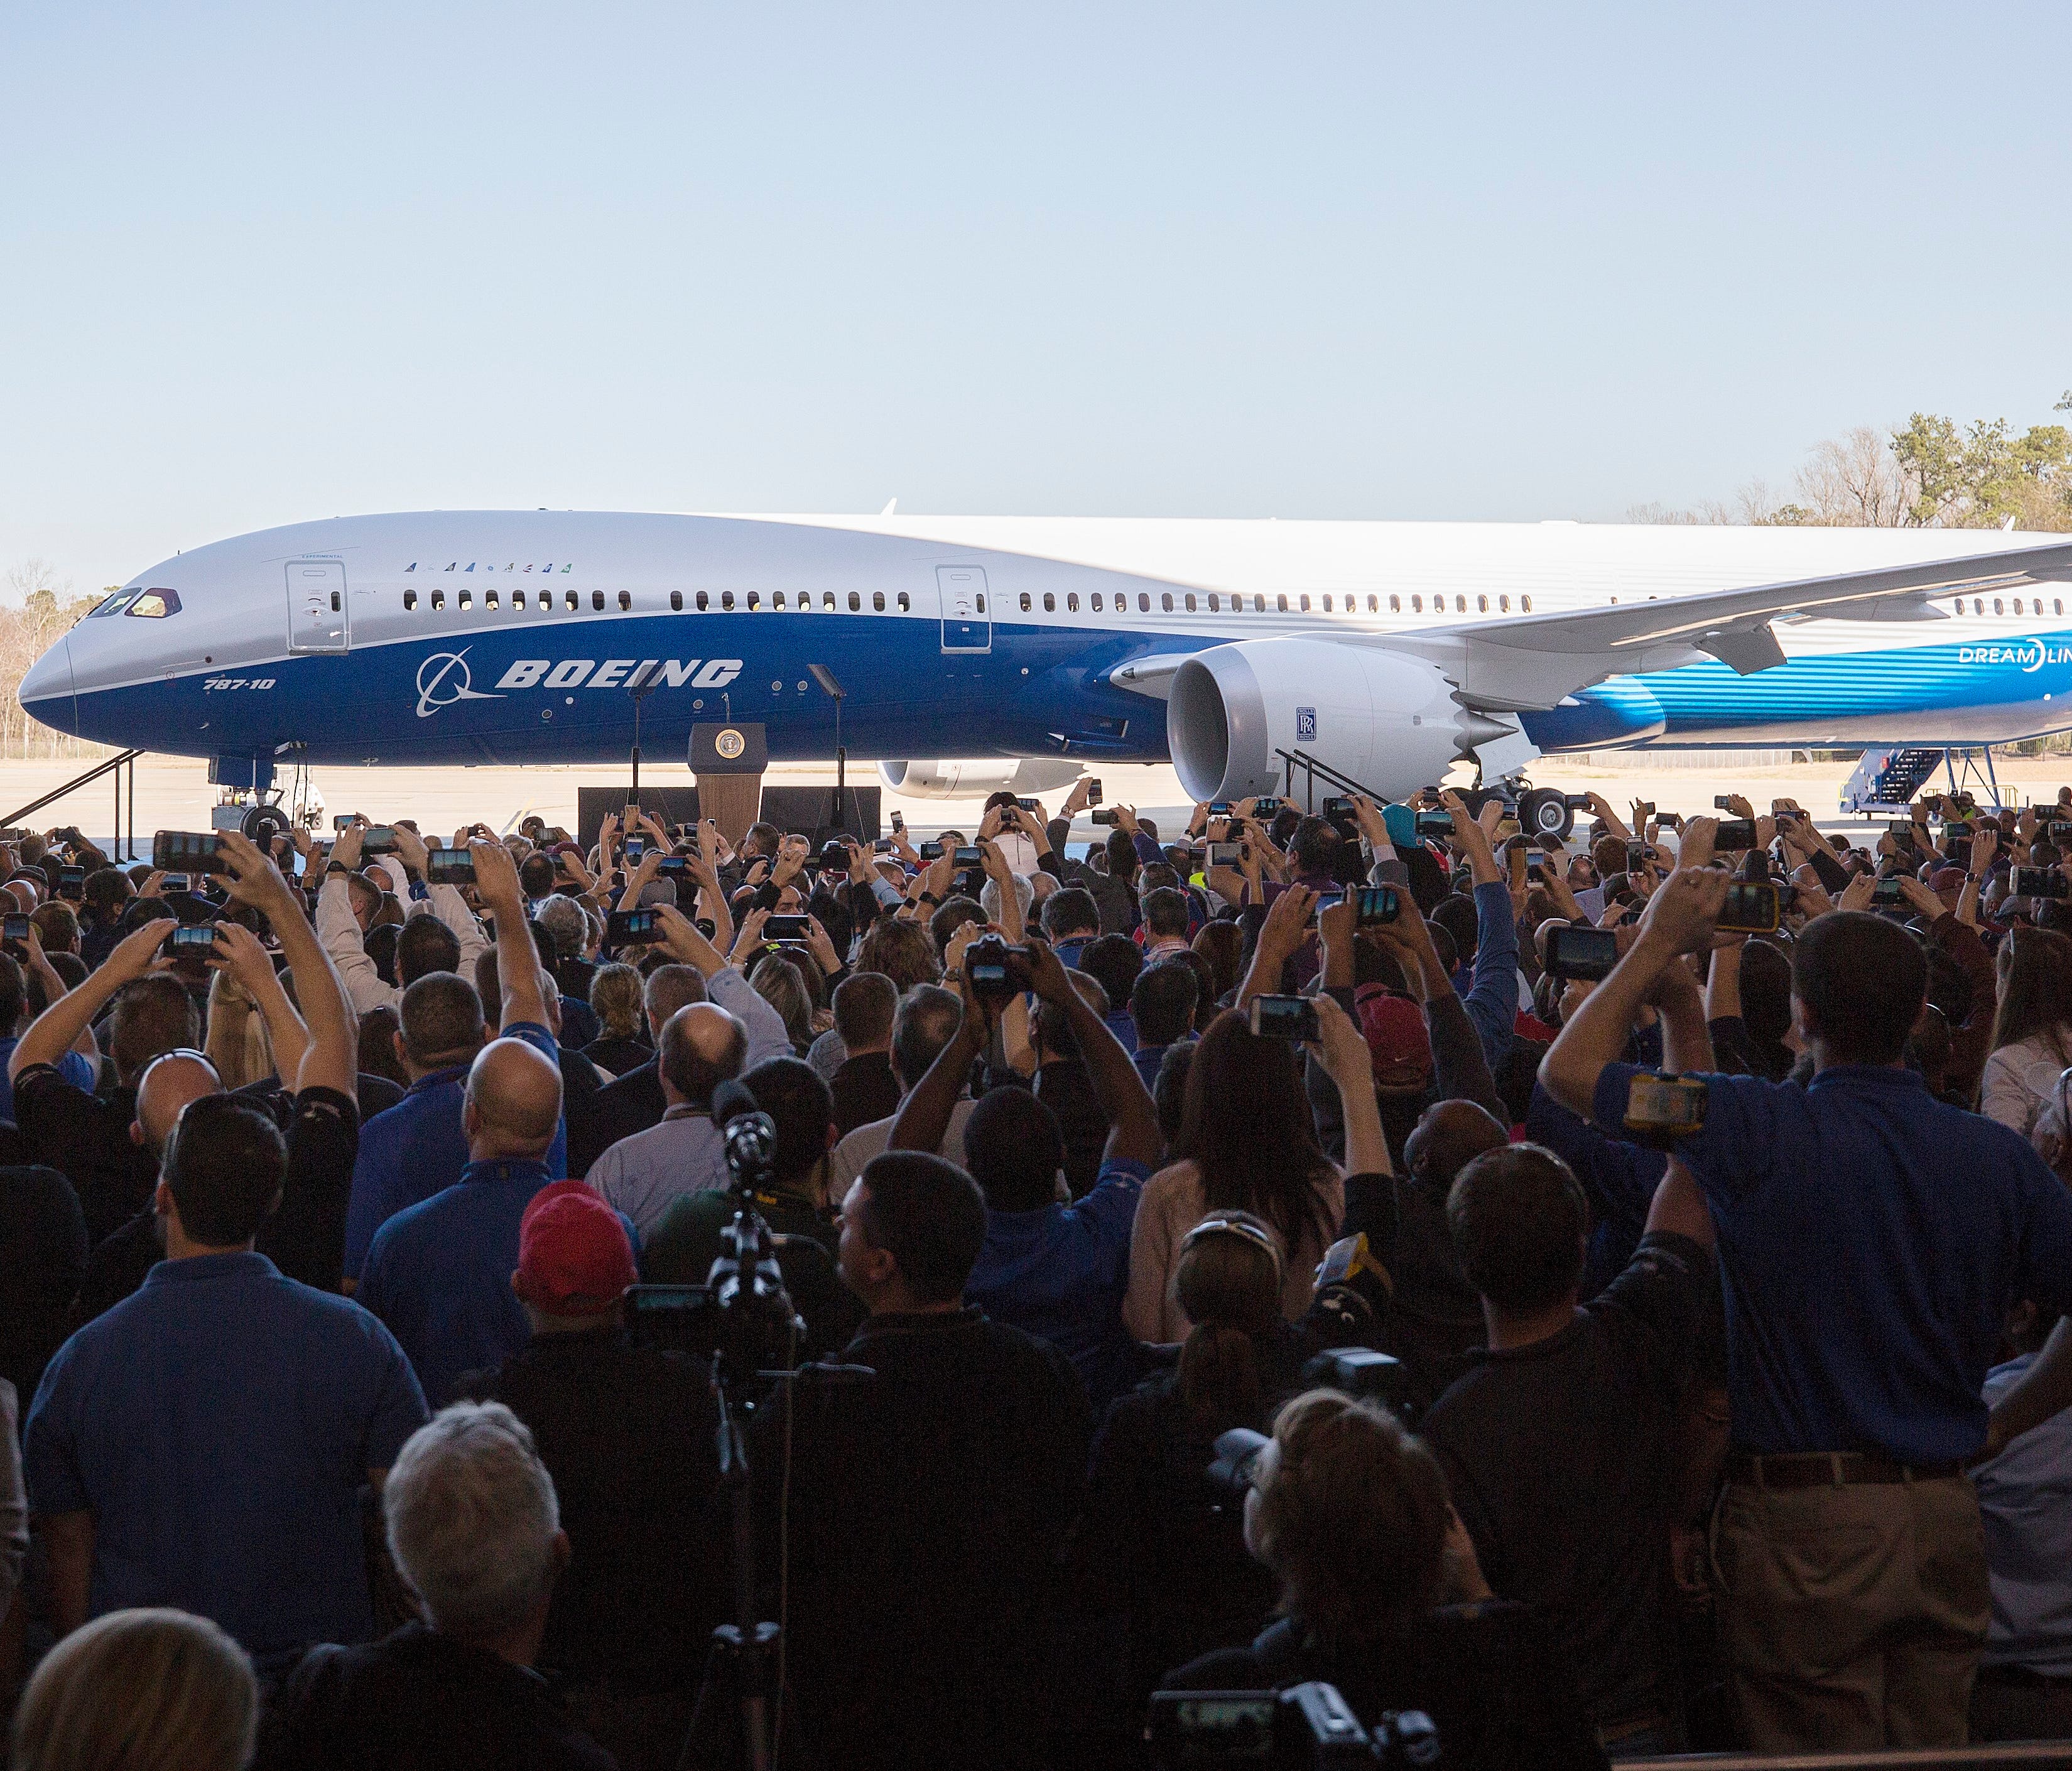 A crowd takes photos of Boeing's new 787-10 Dreamliner at its official unveiling at the jet-maker's production facility in North Charleston, S.C., on Feb. 17, 2017.